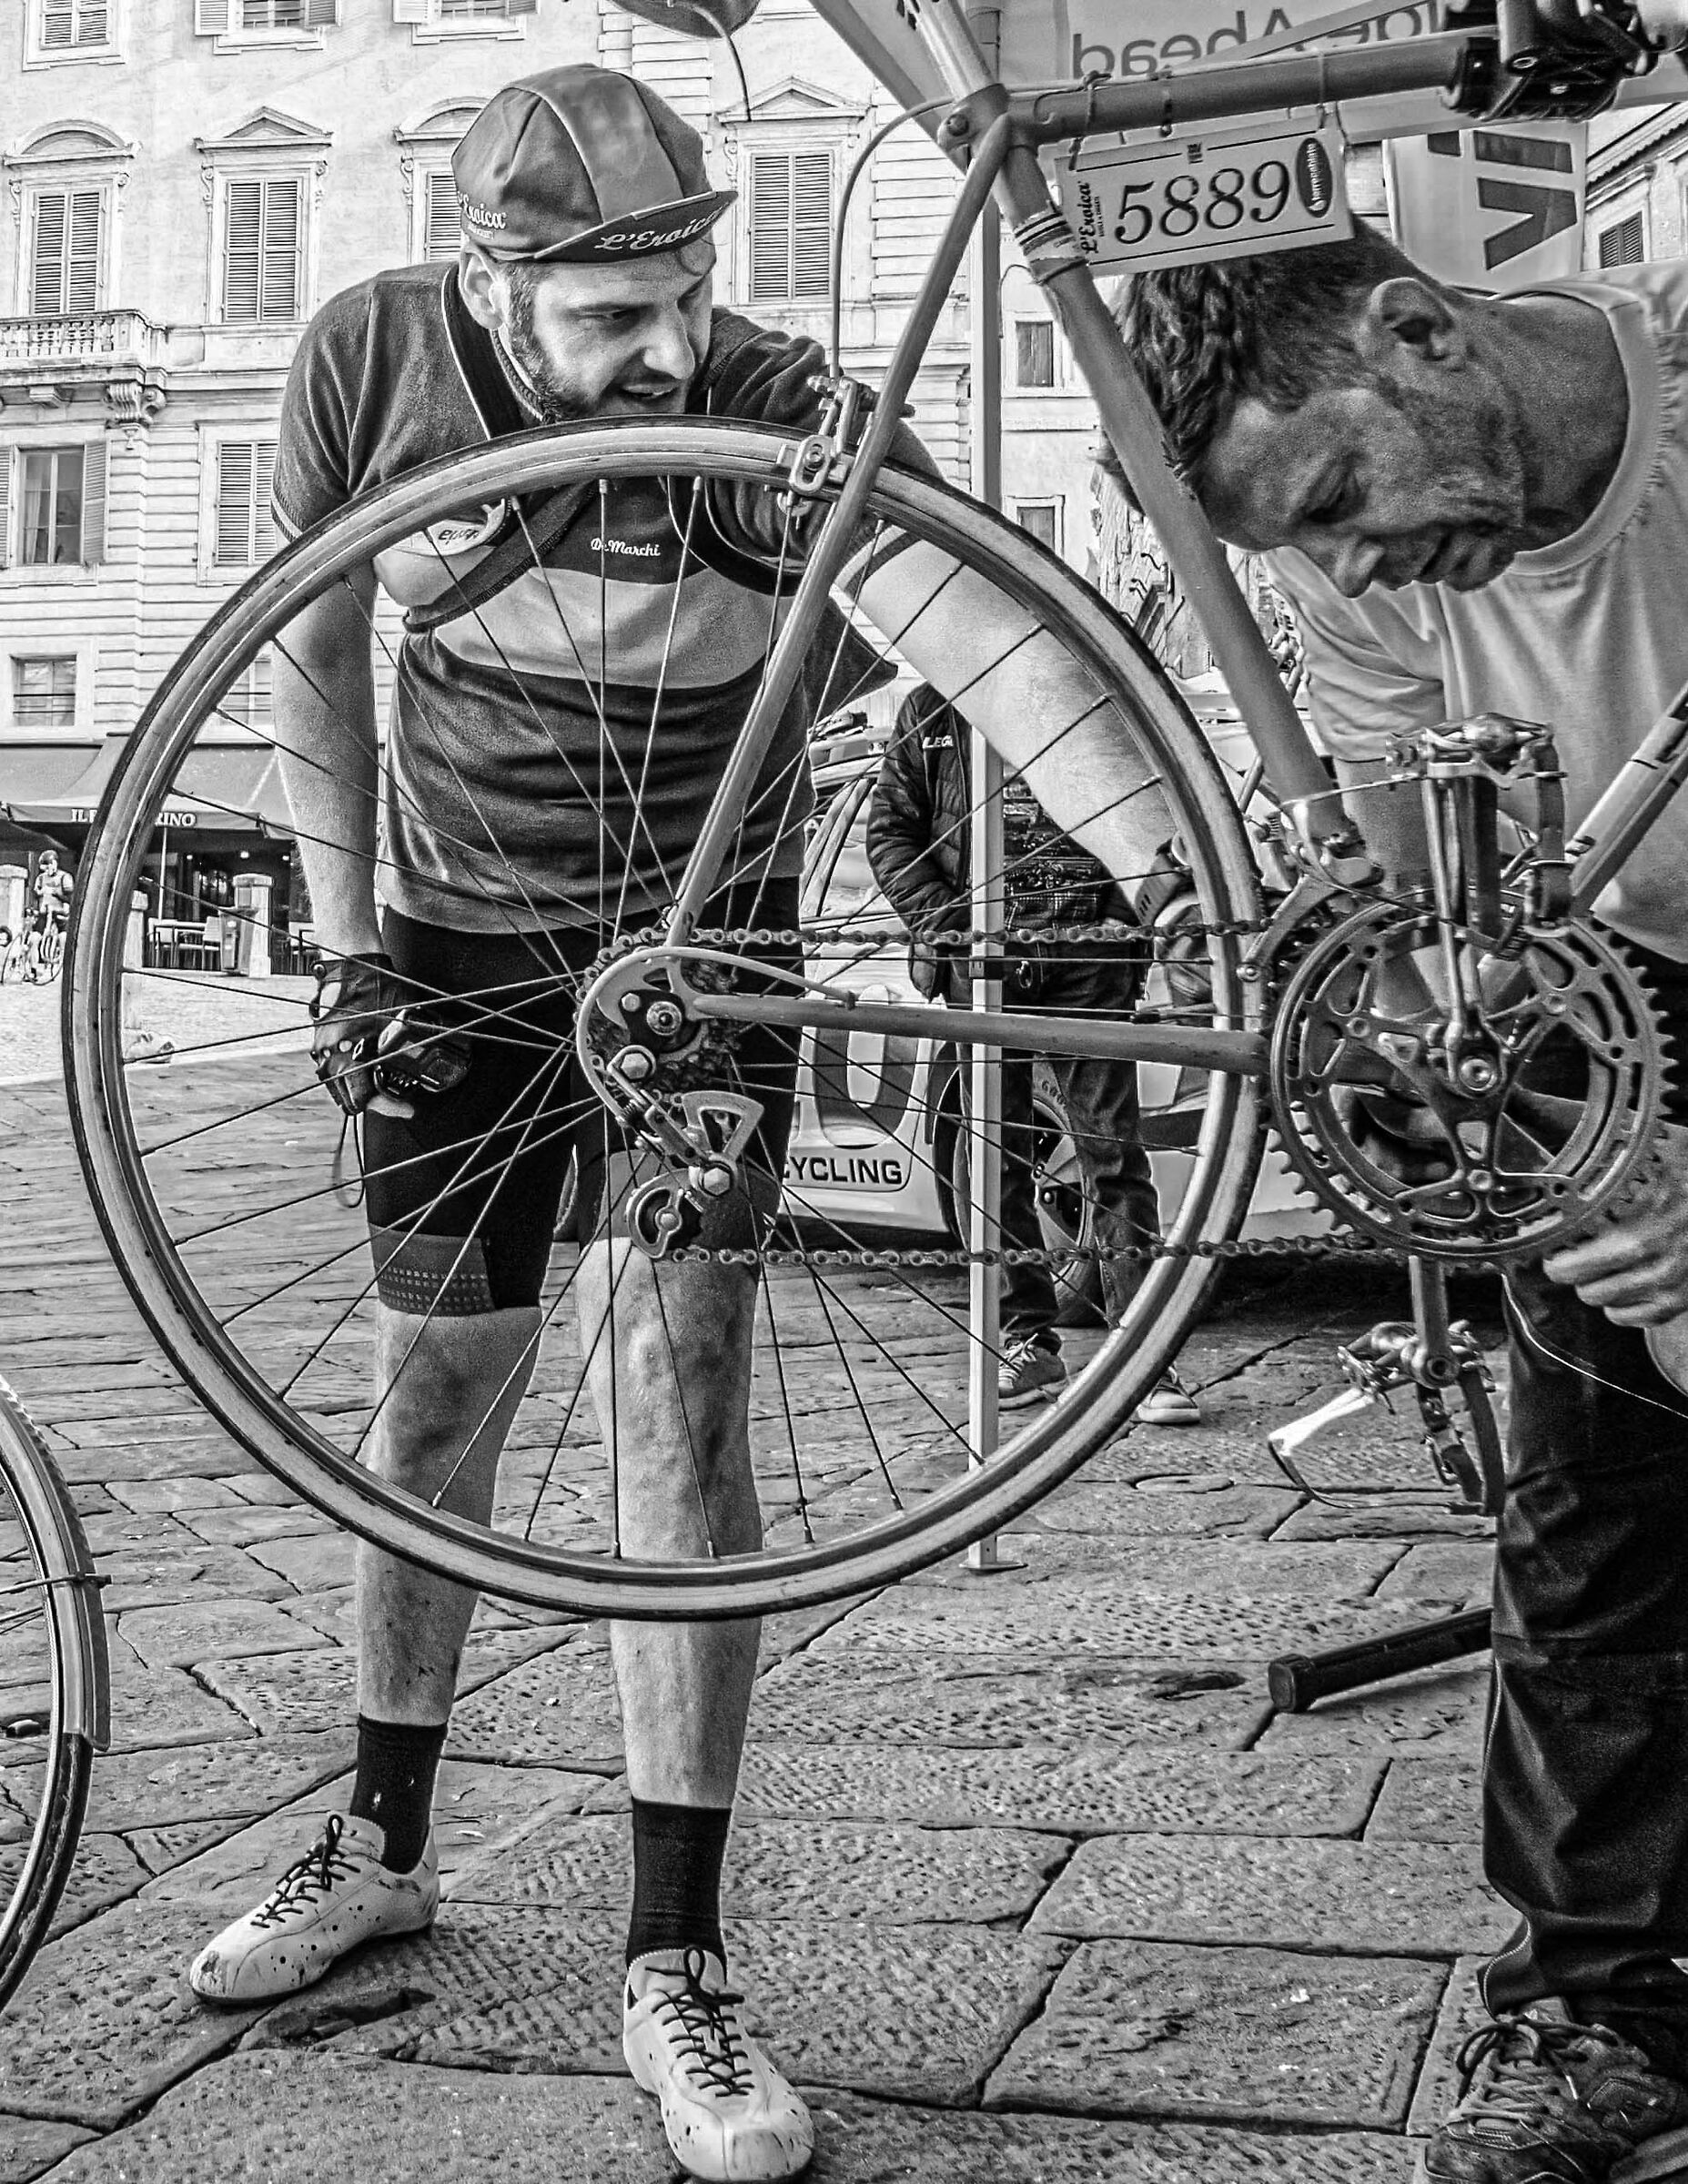 Reparation to the Eroica...